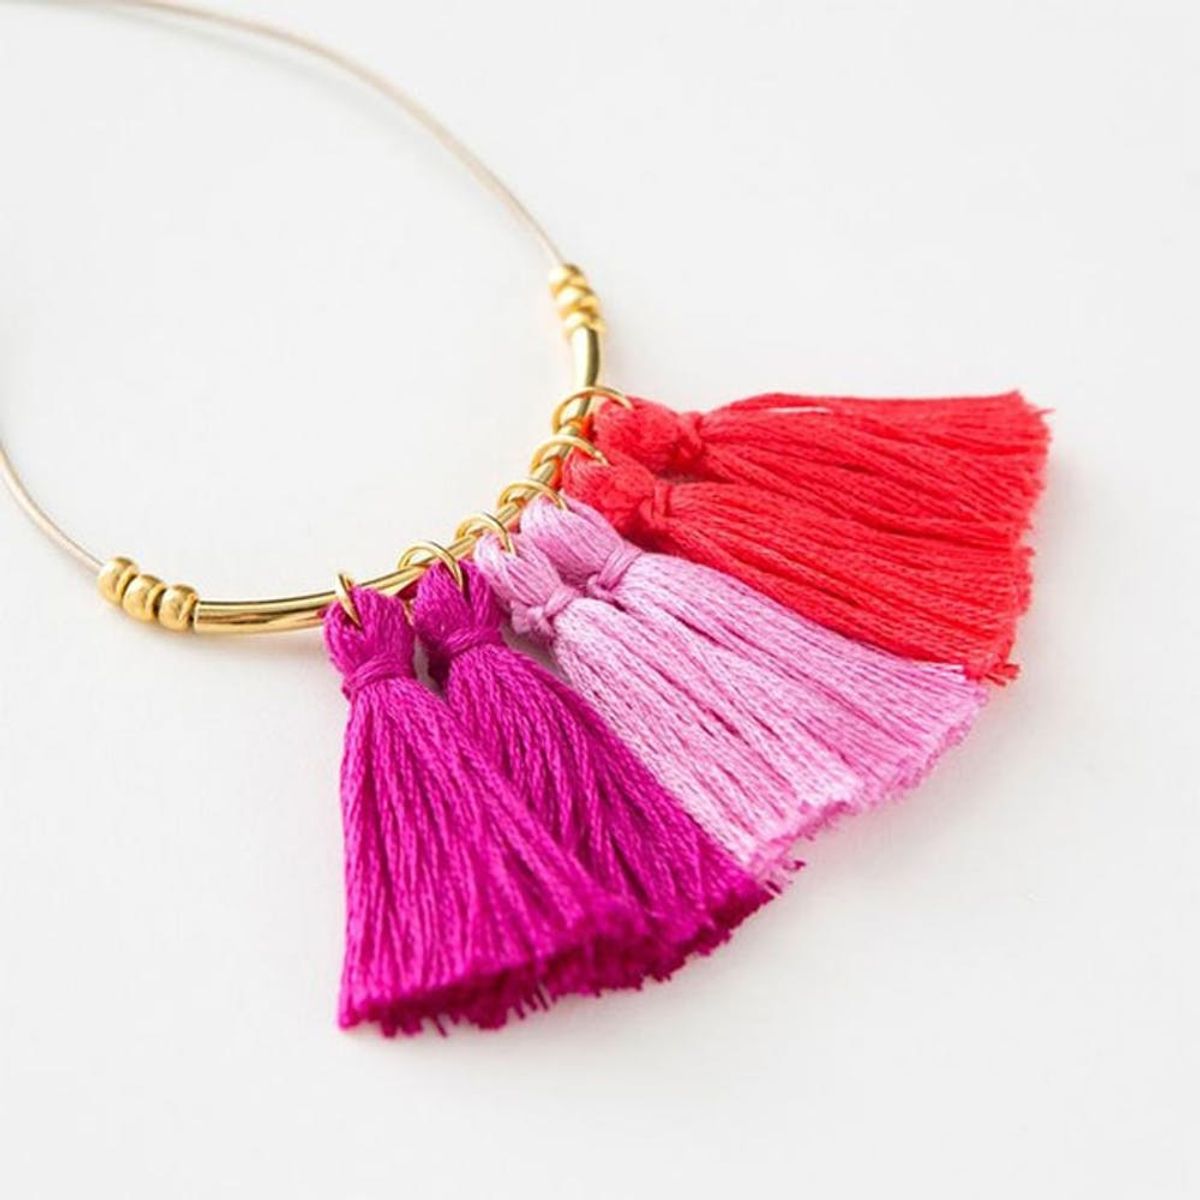 21 Accessories to Top Off Your LBD This V-Day - Brit + Co